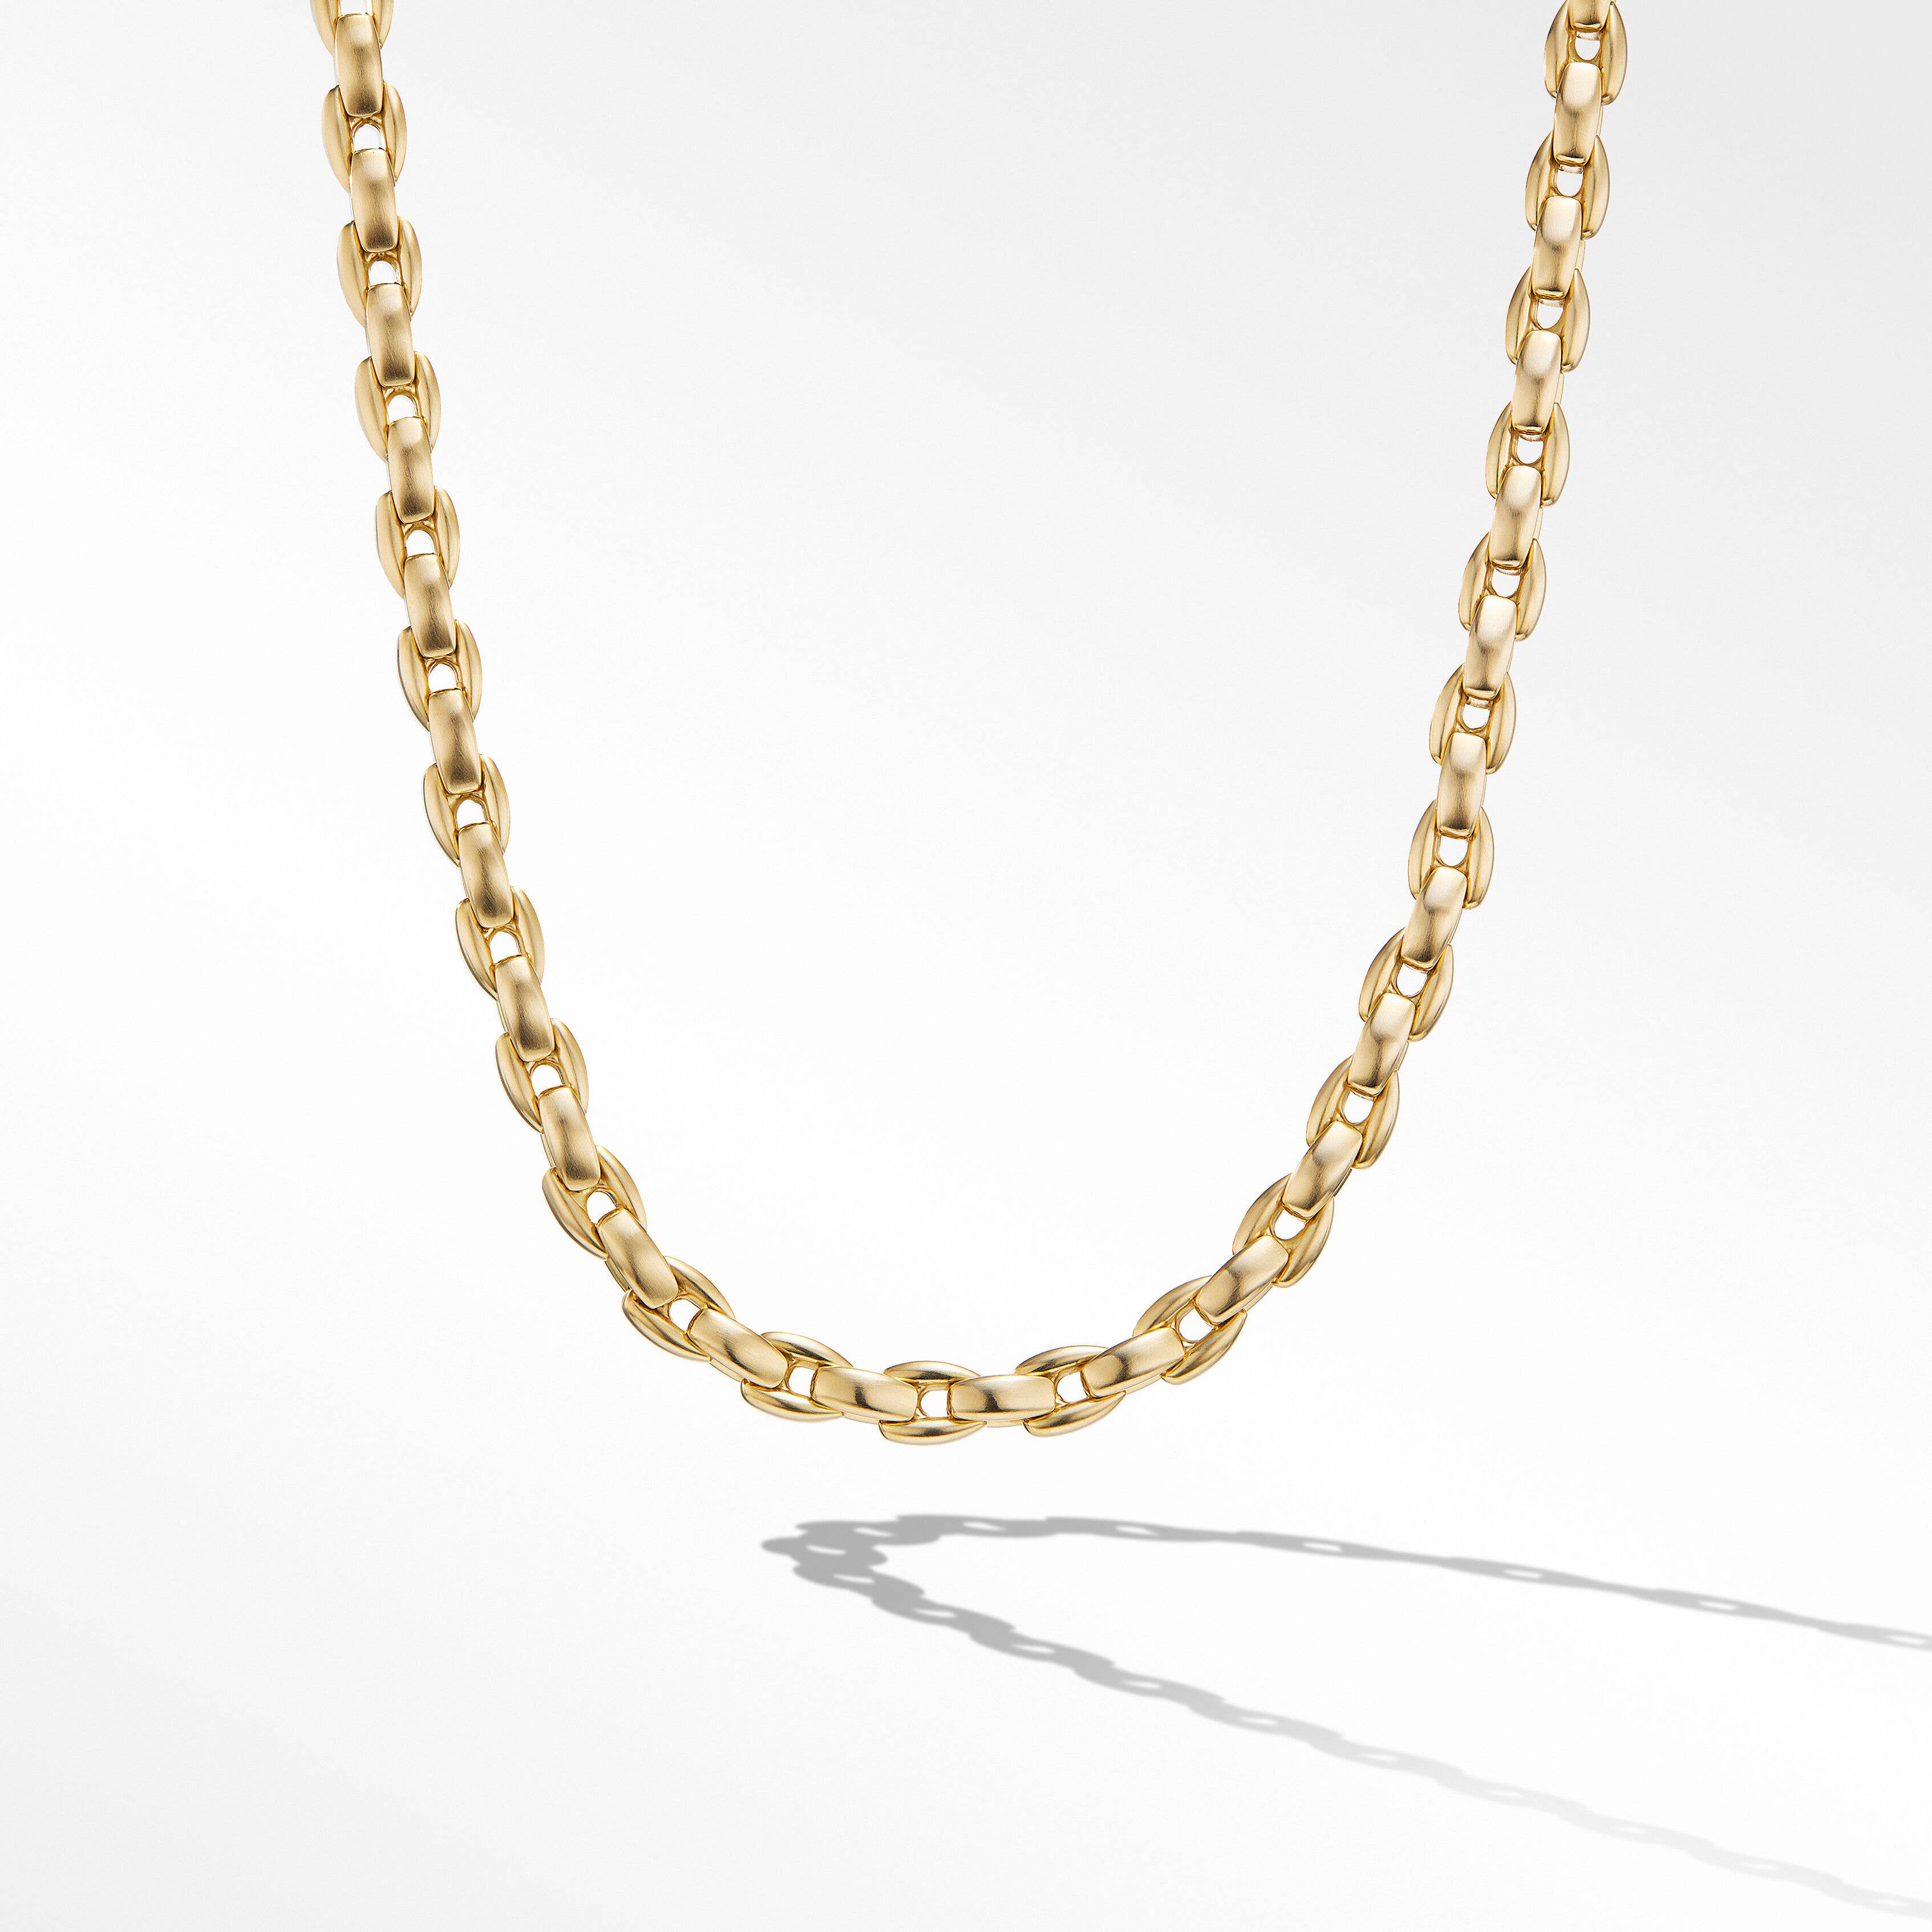 Elongated Box Chain in 18K Gold, 6mm